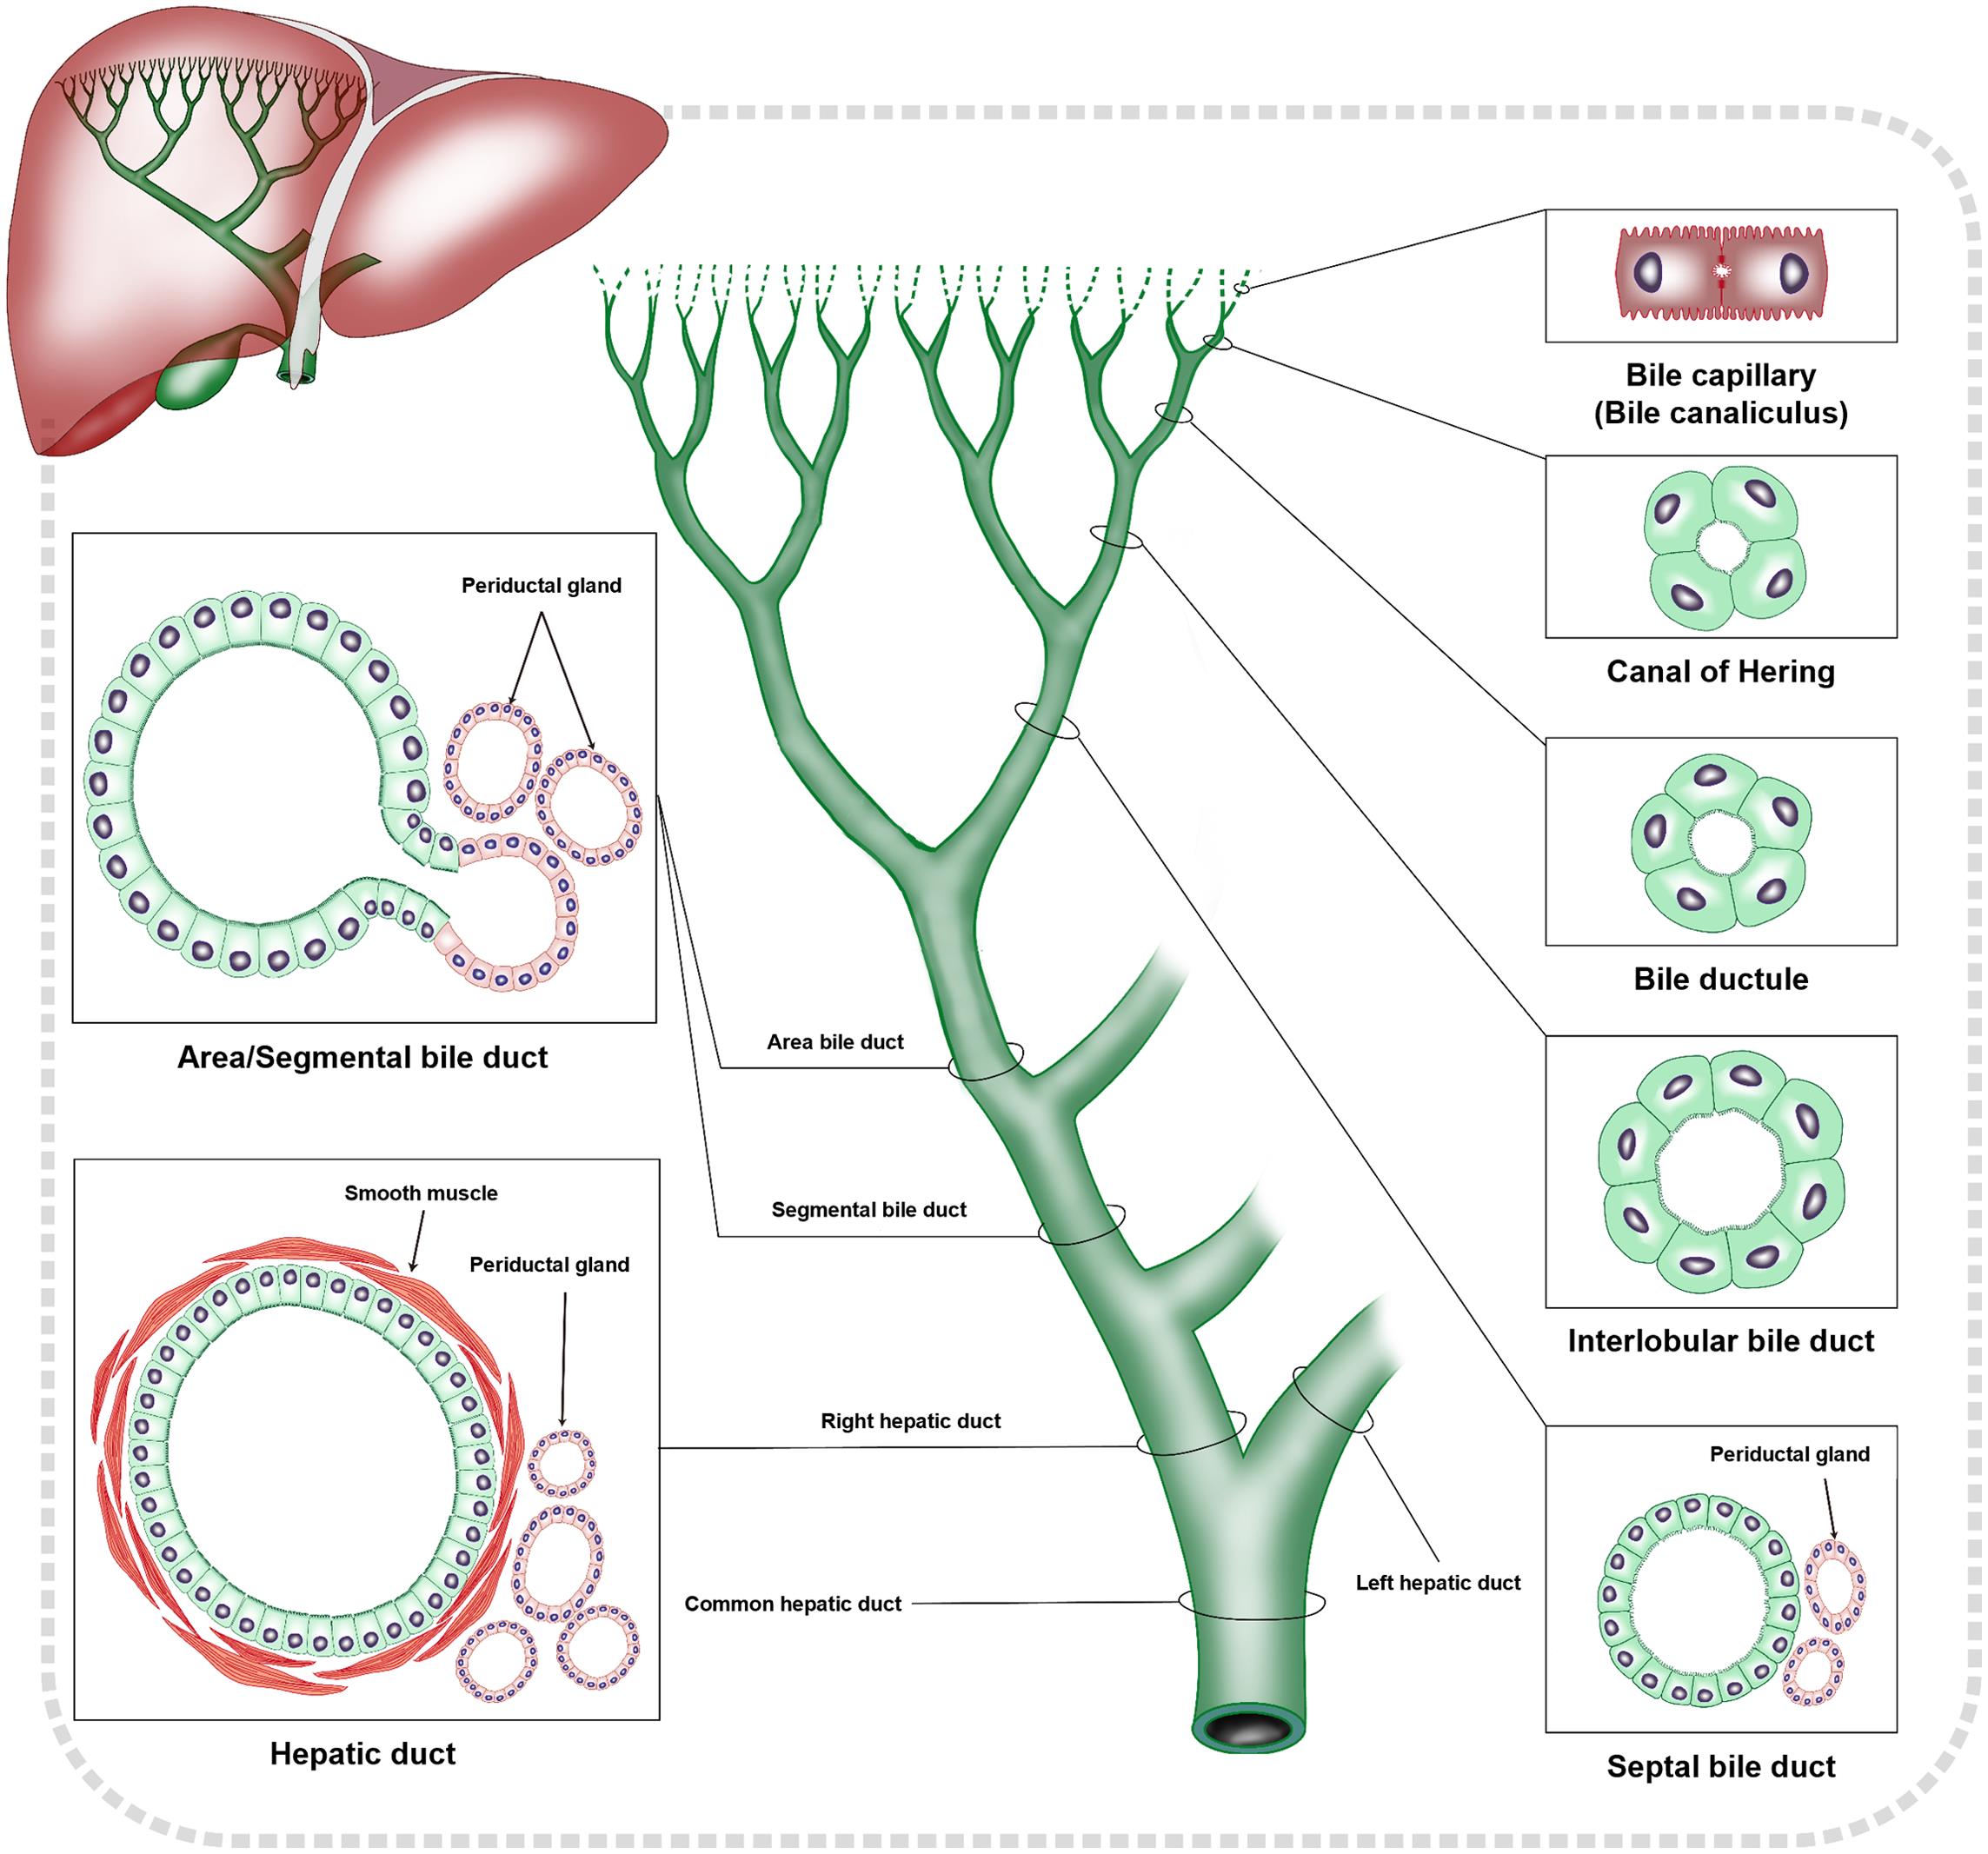 Schematic diagram of structural characteristics of intrahepatic biliary system.